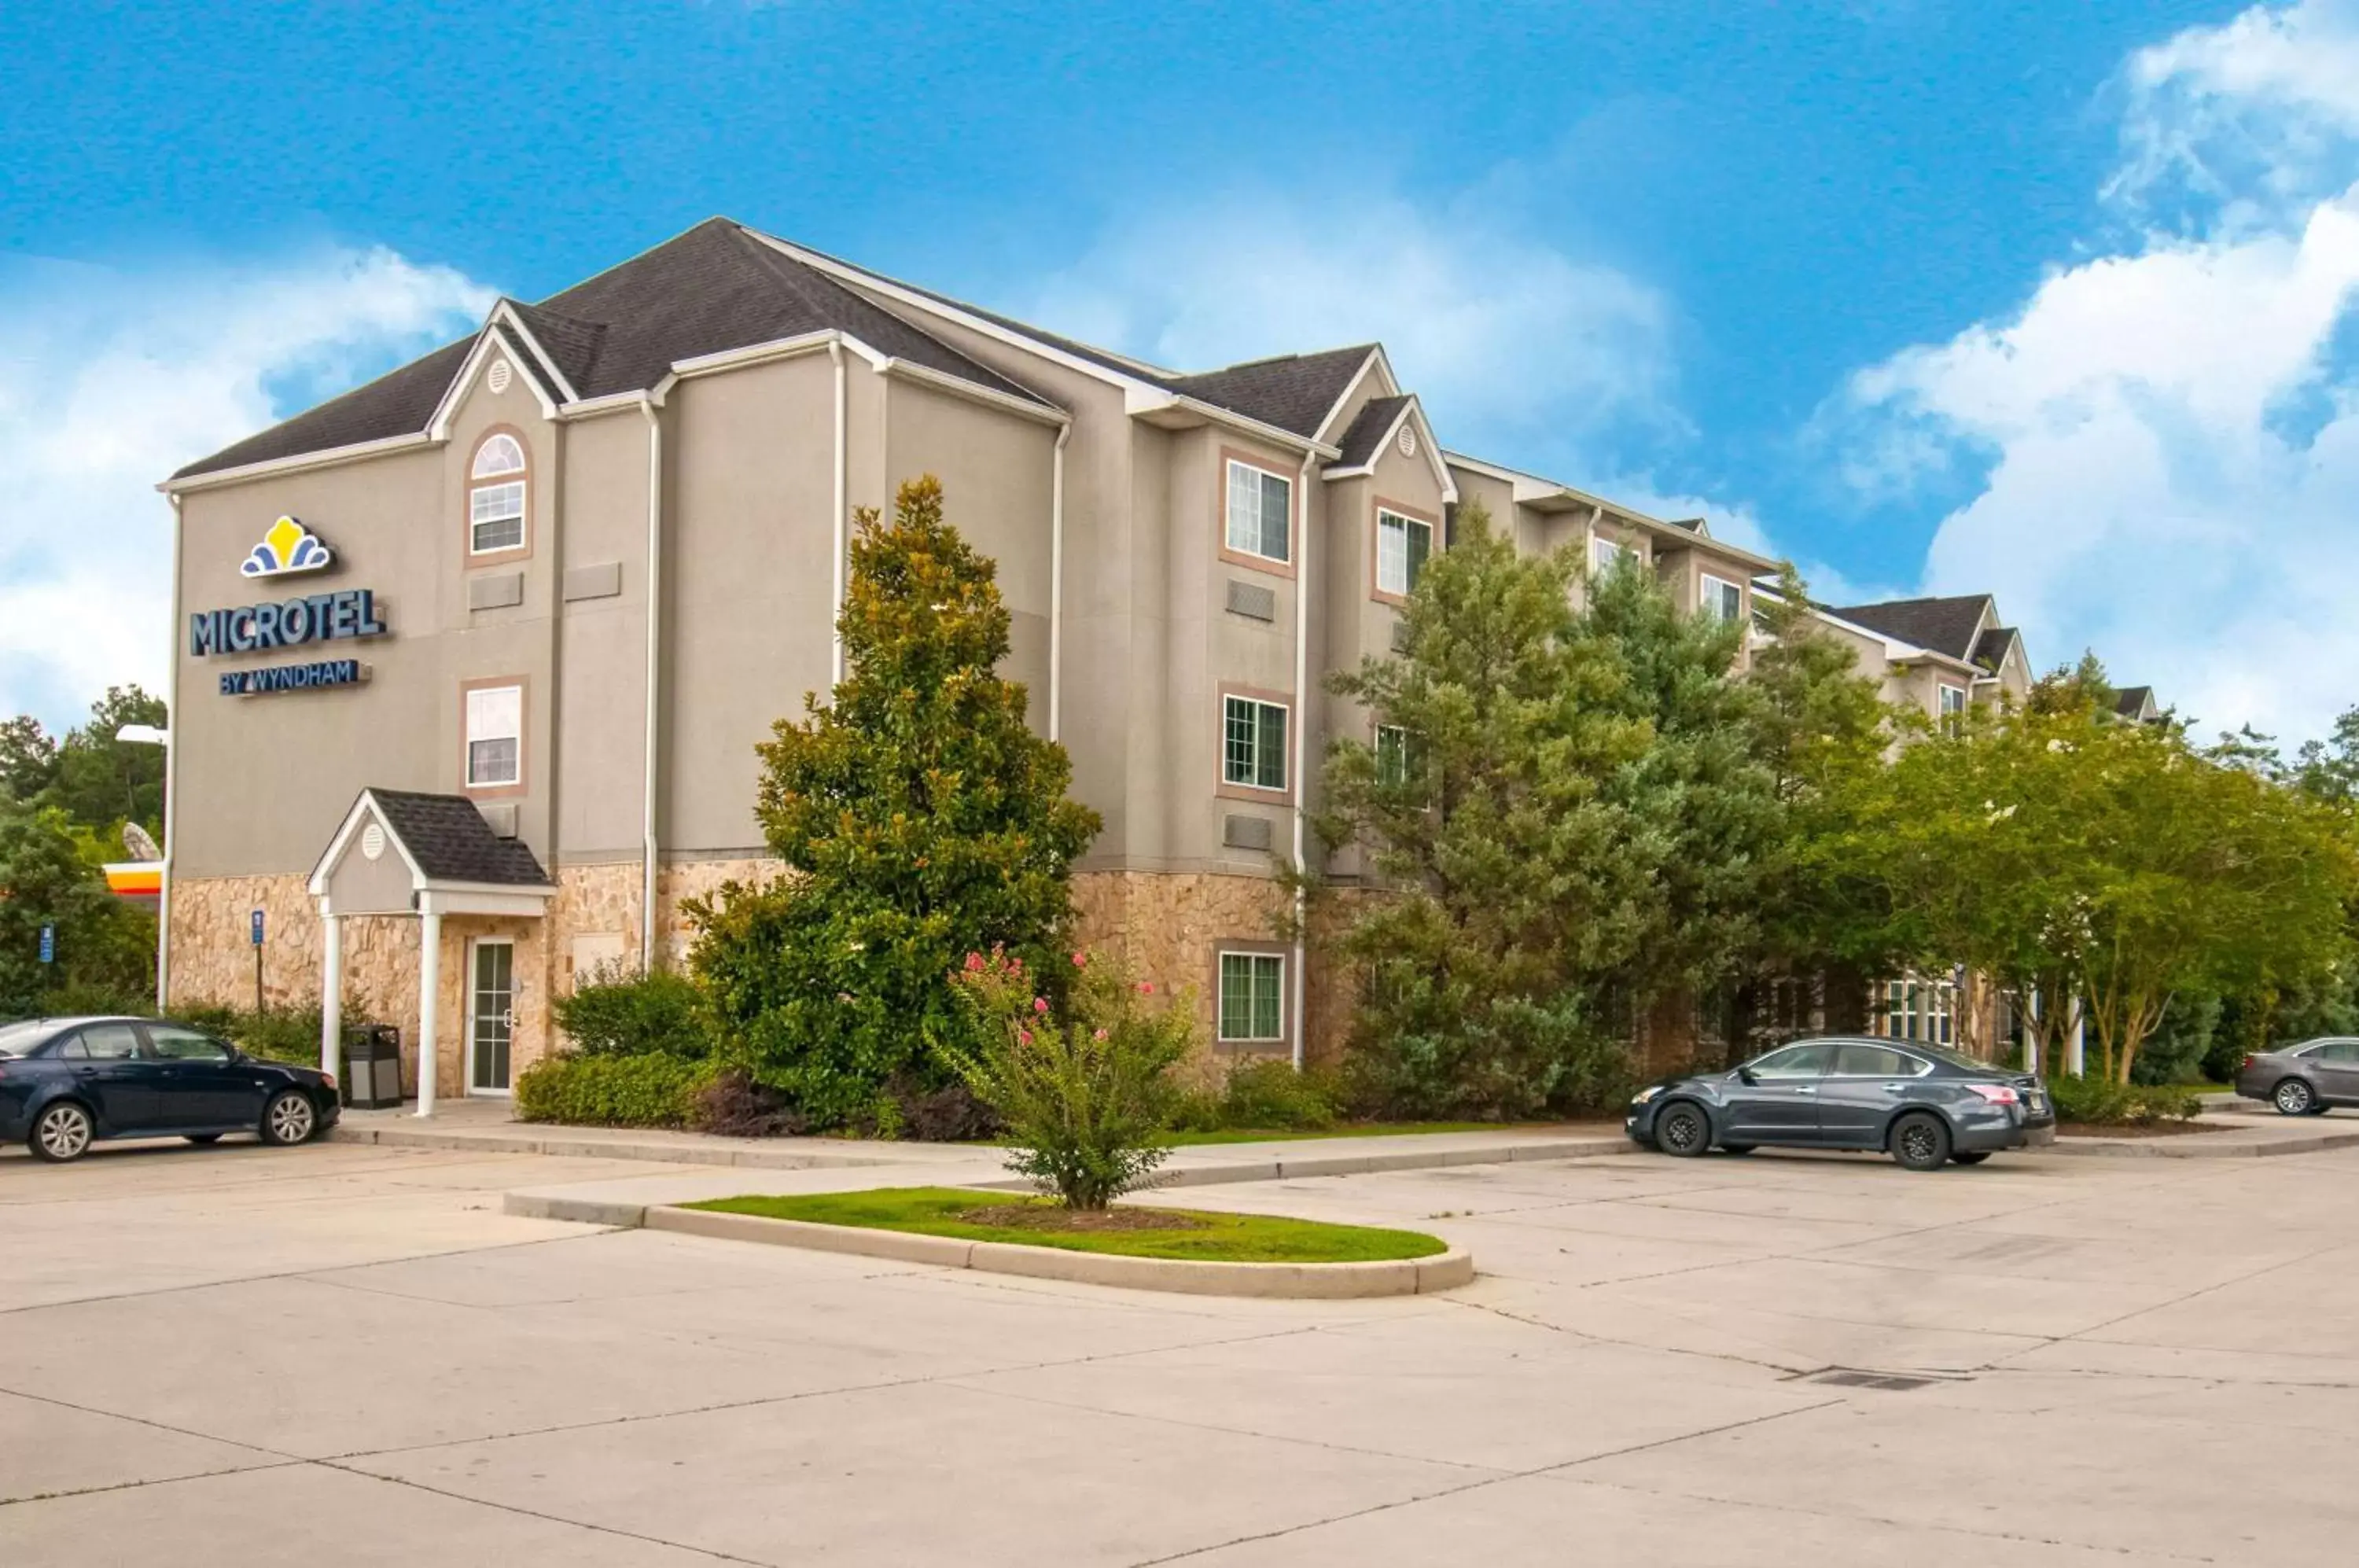 Property building in Microtel Inn & Suites by Wyndham Pearl River/Slidell